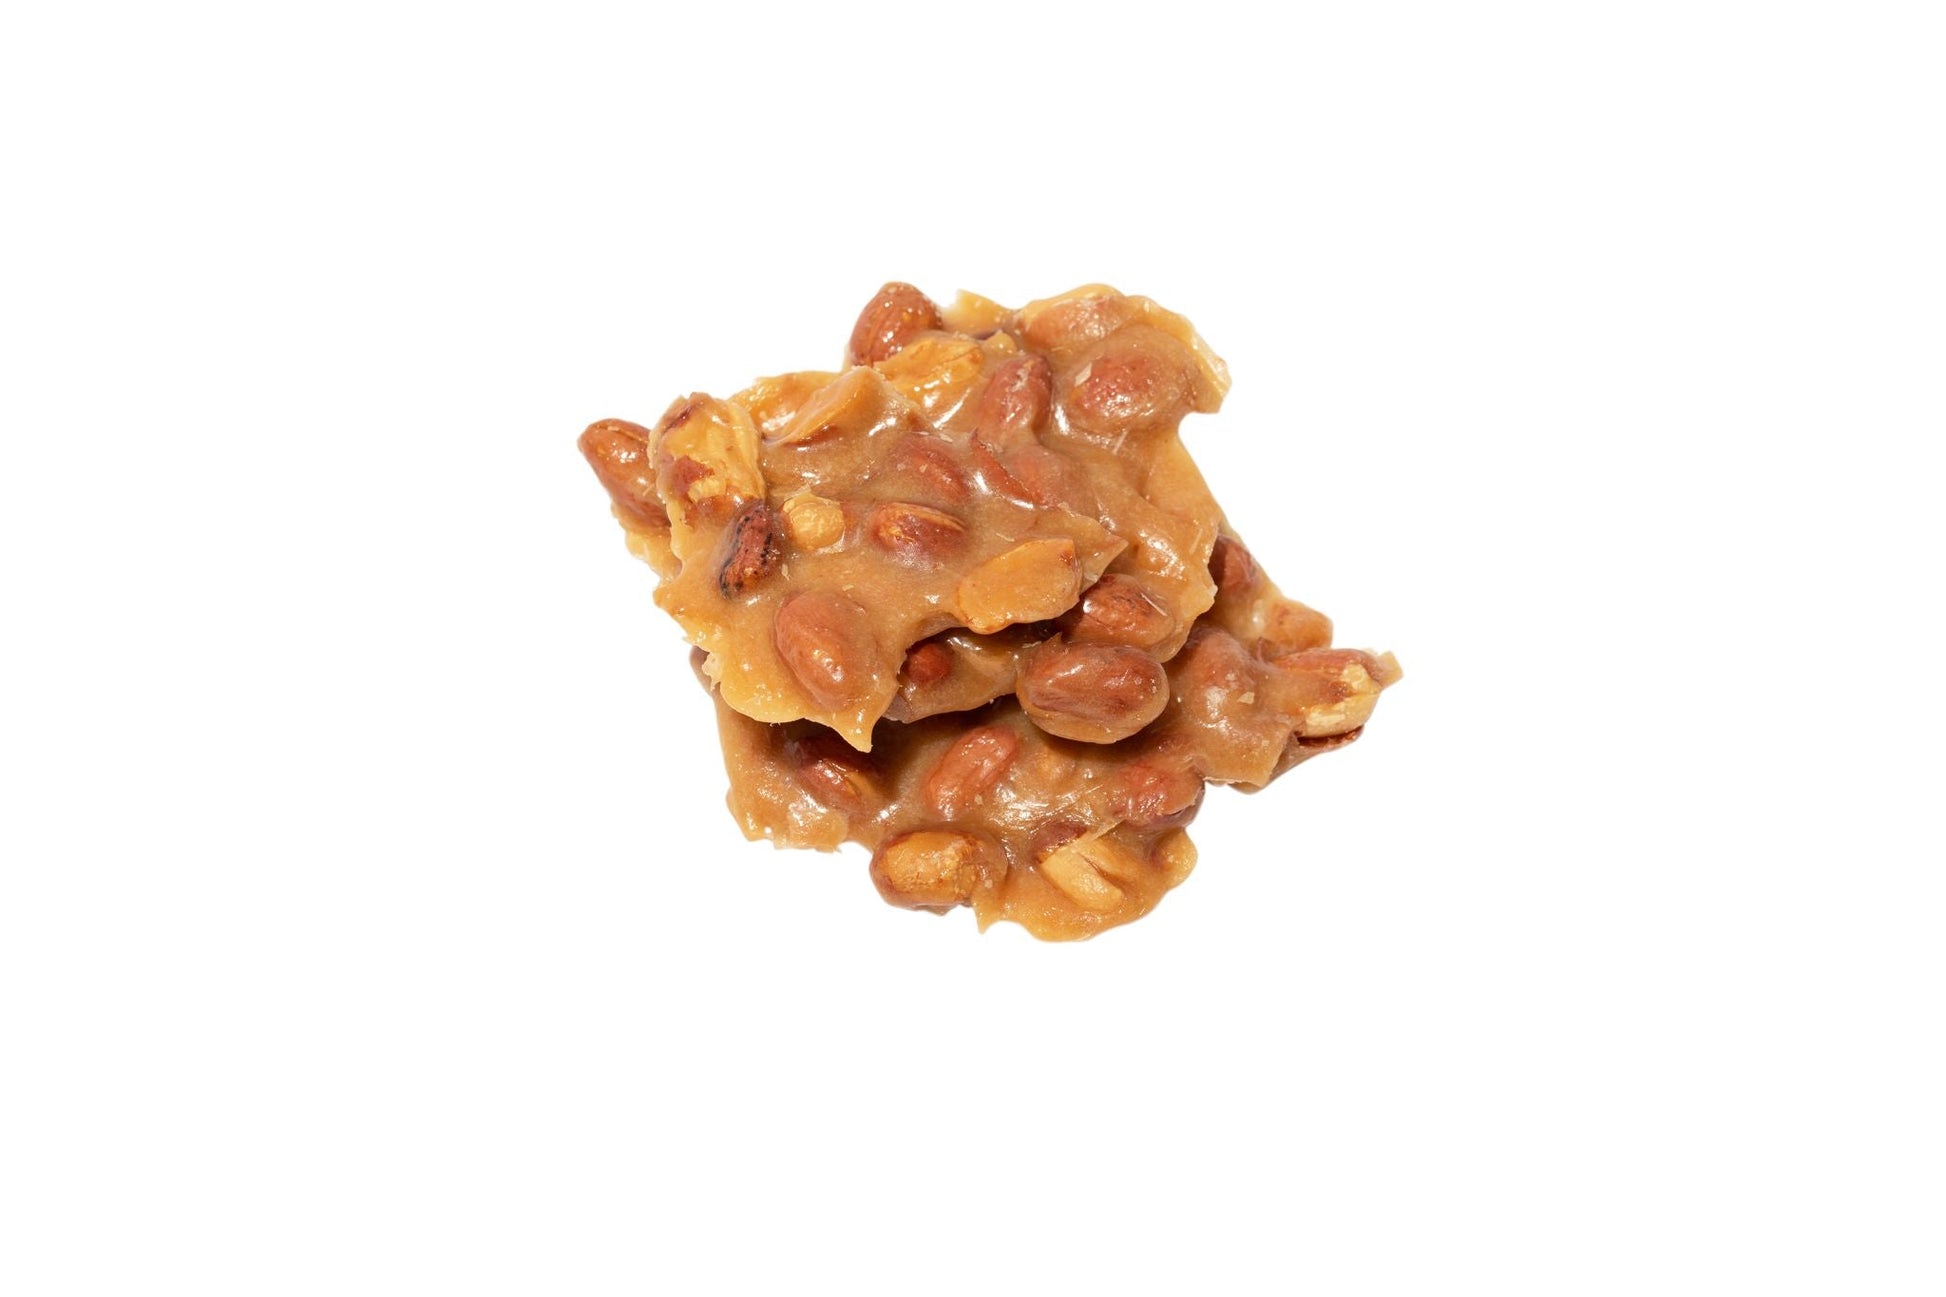 Homemade Peanut Brittle - Hill Country Chocolate